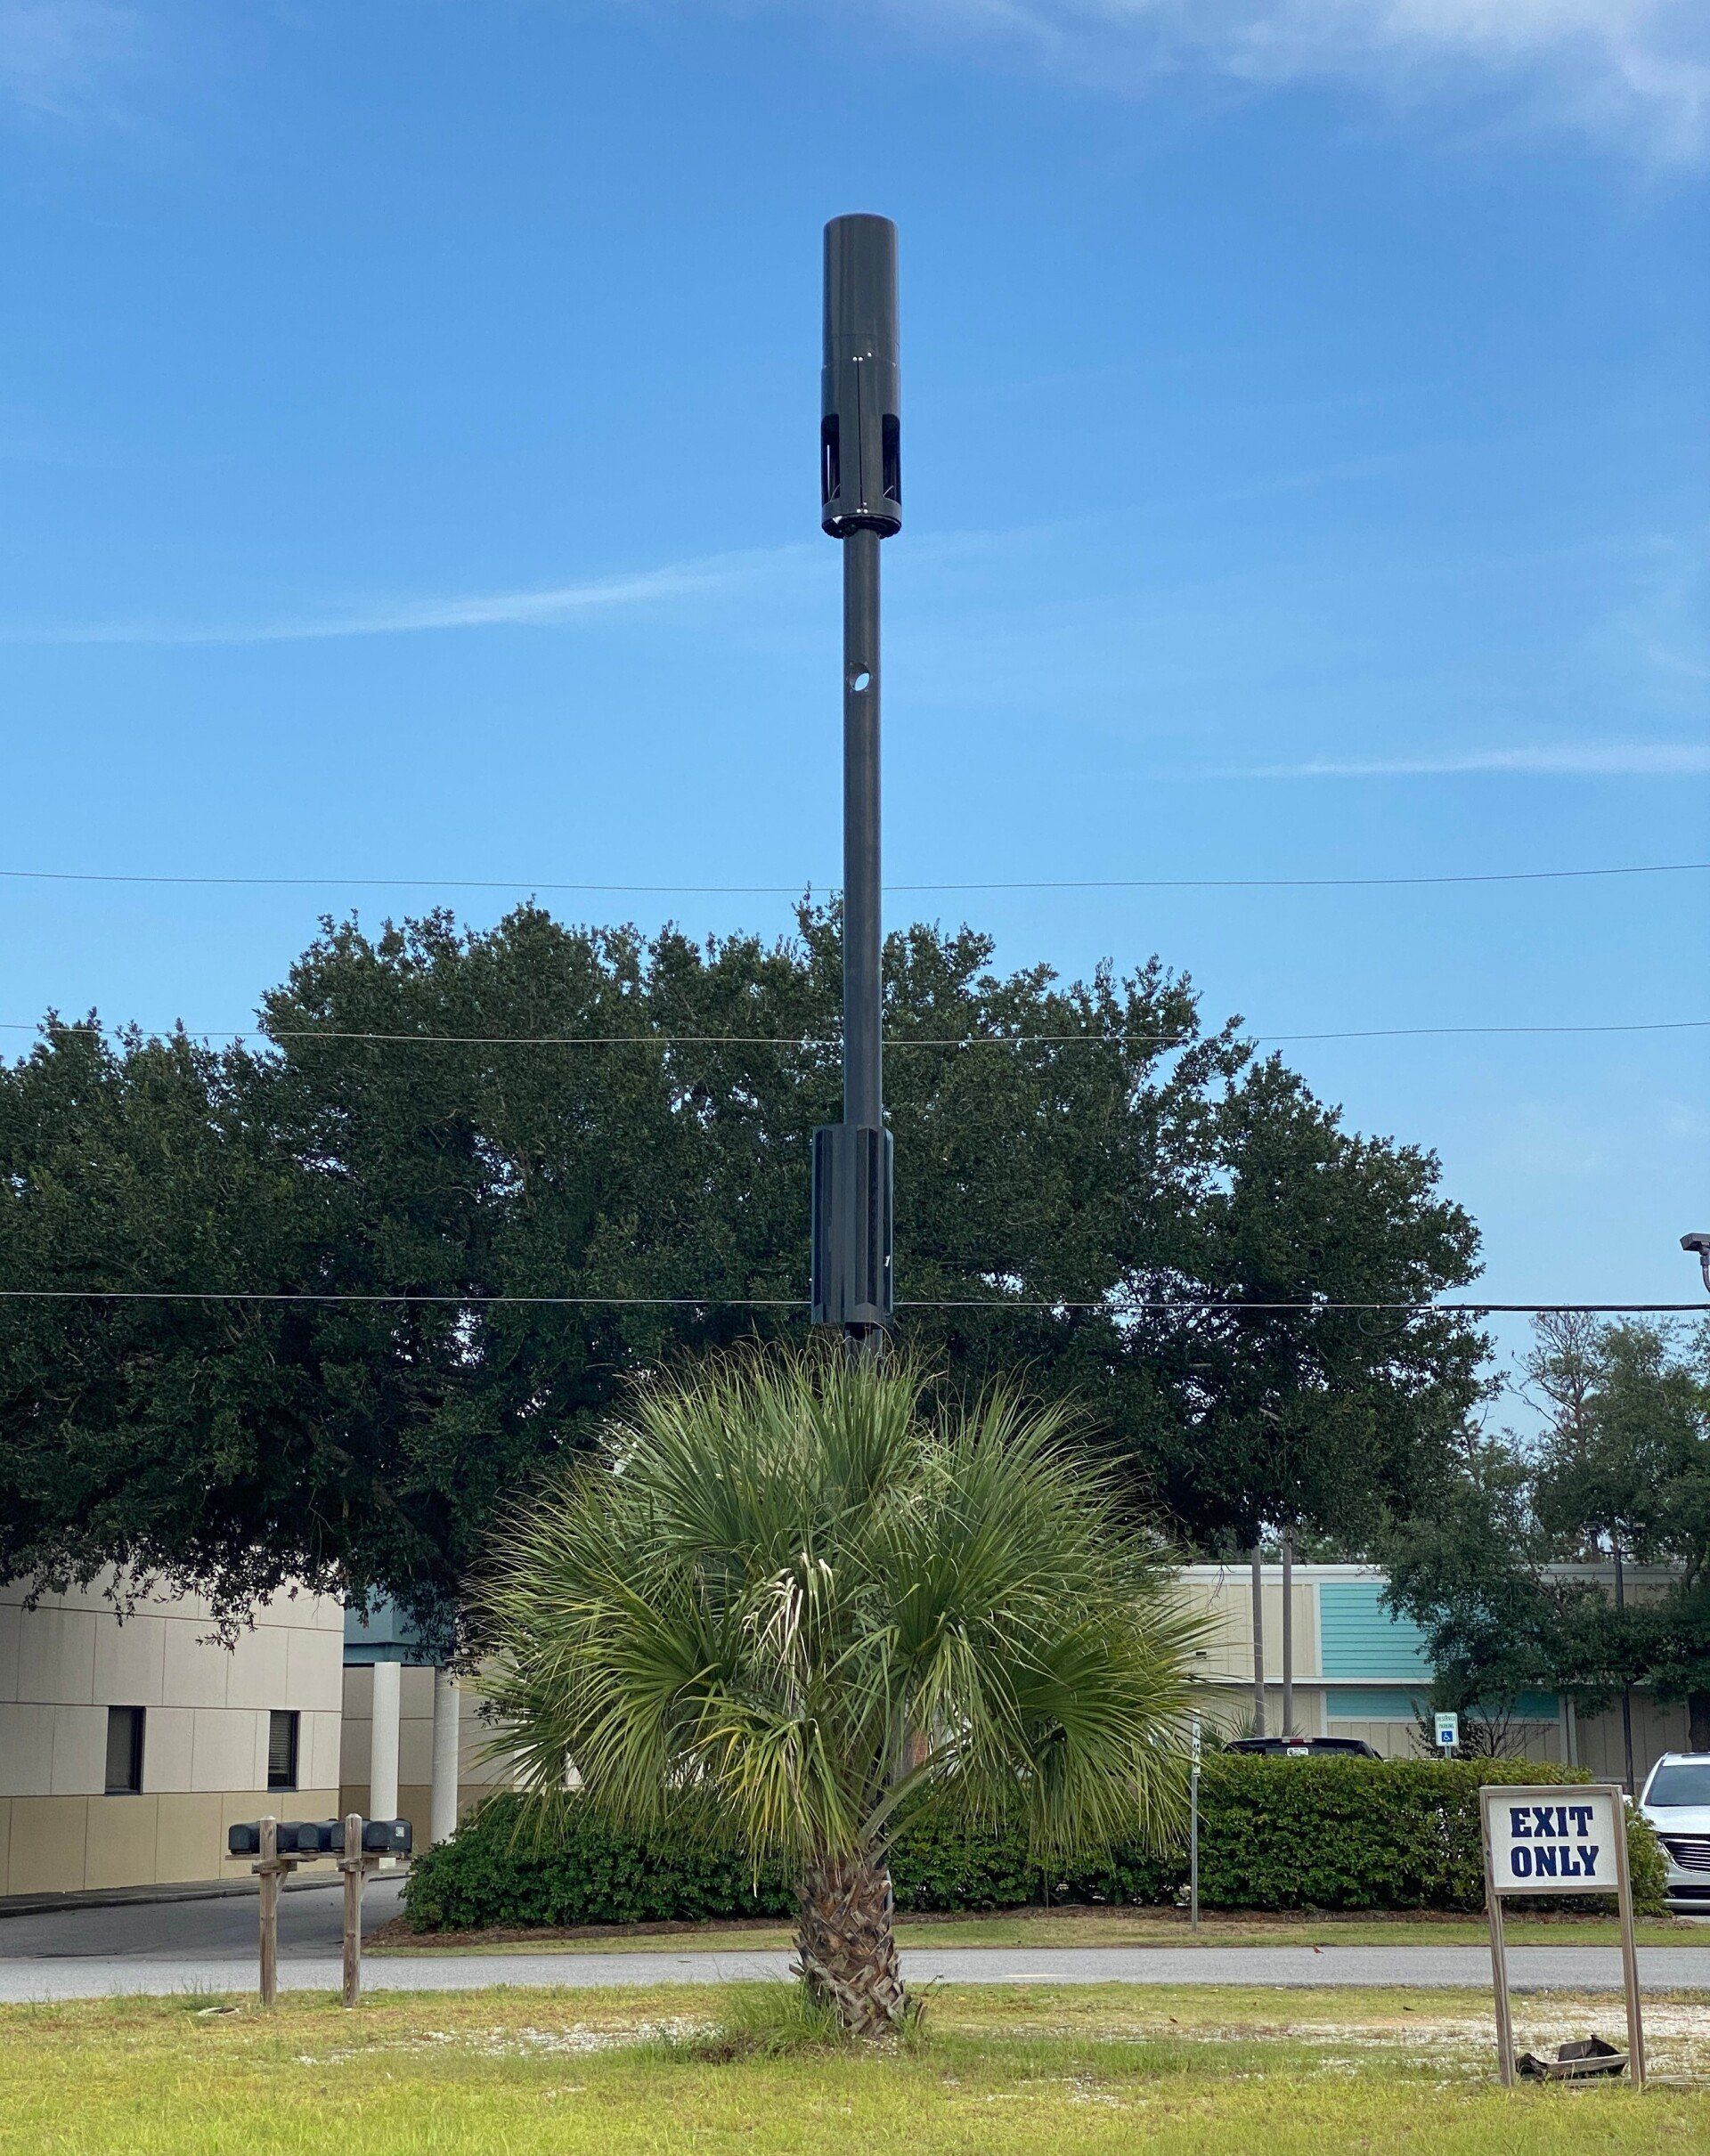 New utility poles will help wireless coverage Orange Beach, Alabama, officials say.